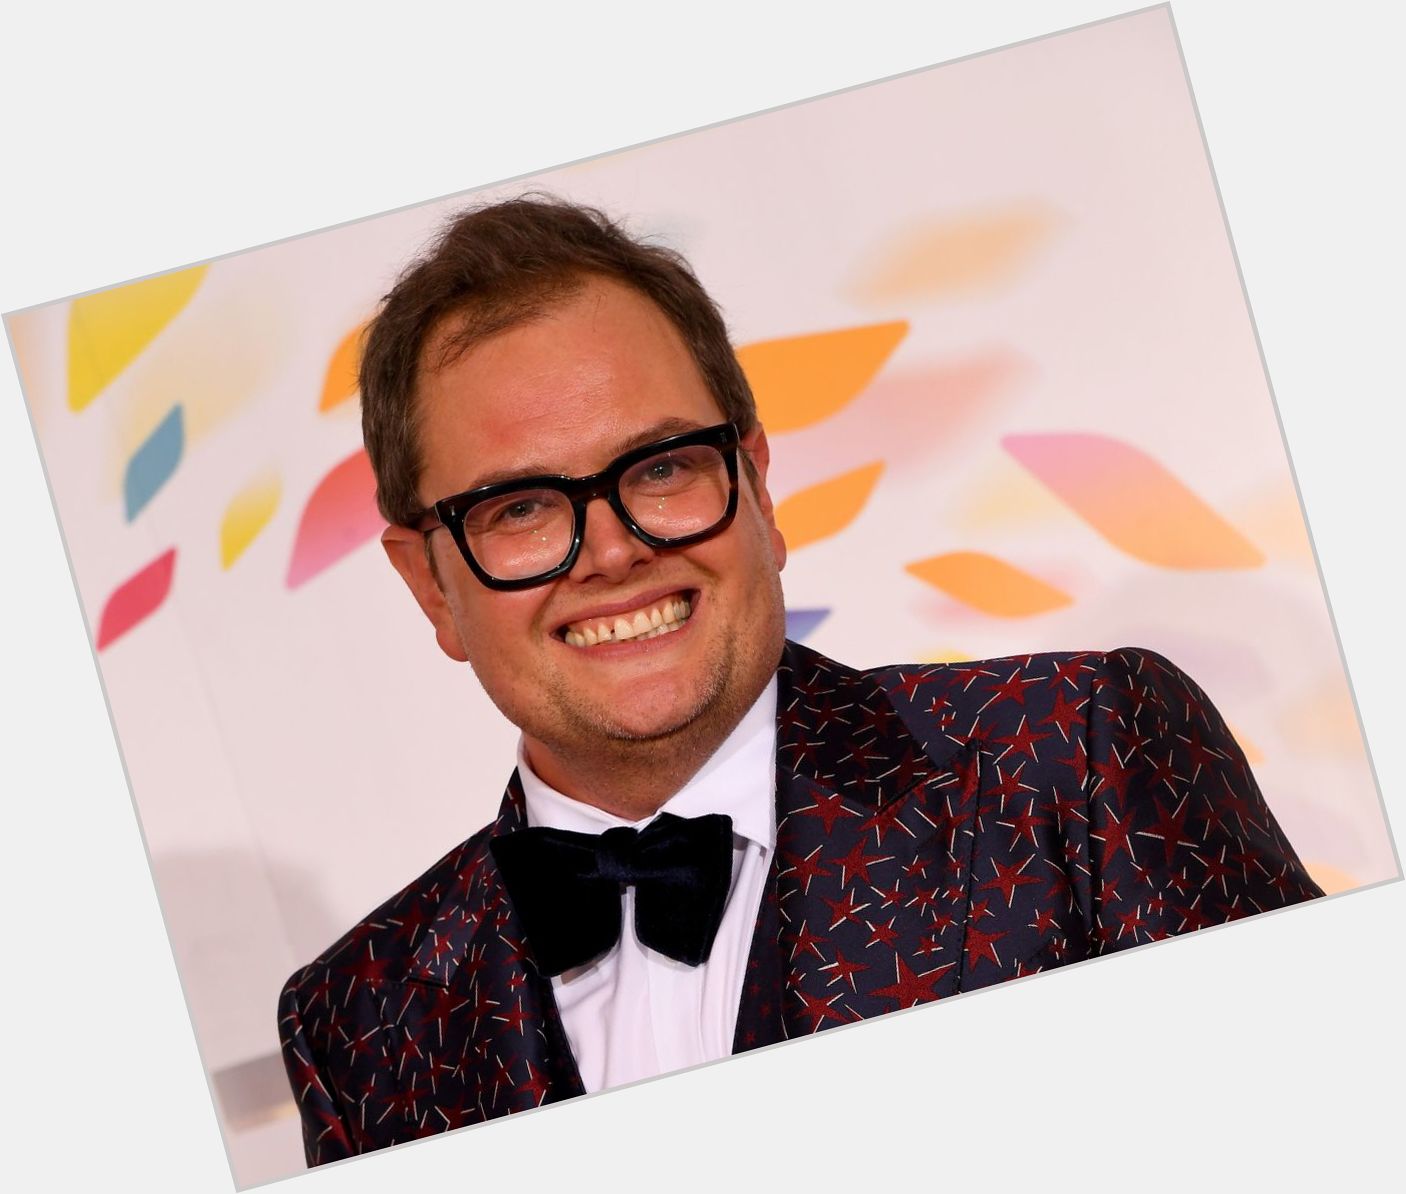 Https://fanpagepress.net/m/A/alan Carr And One Direction 1